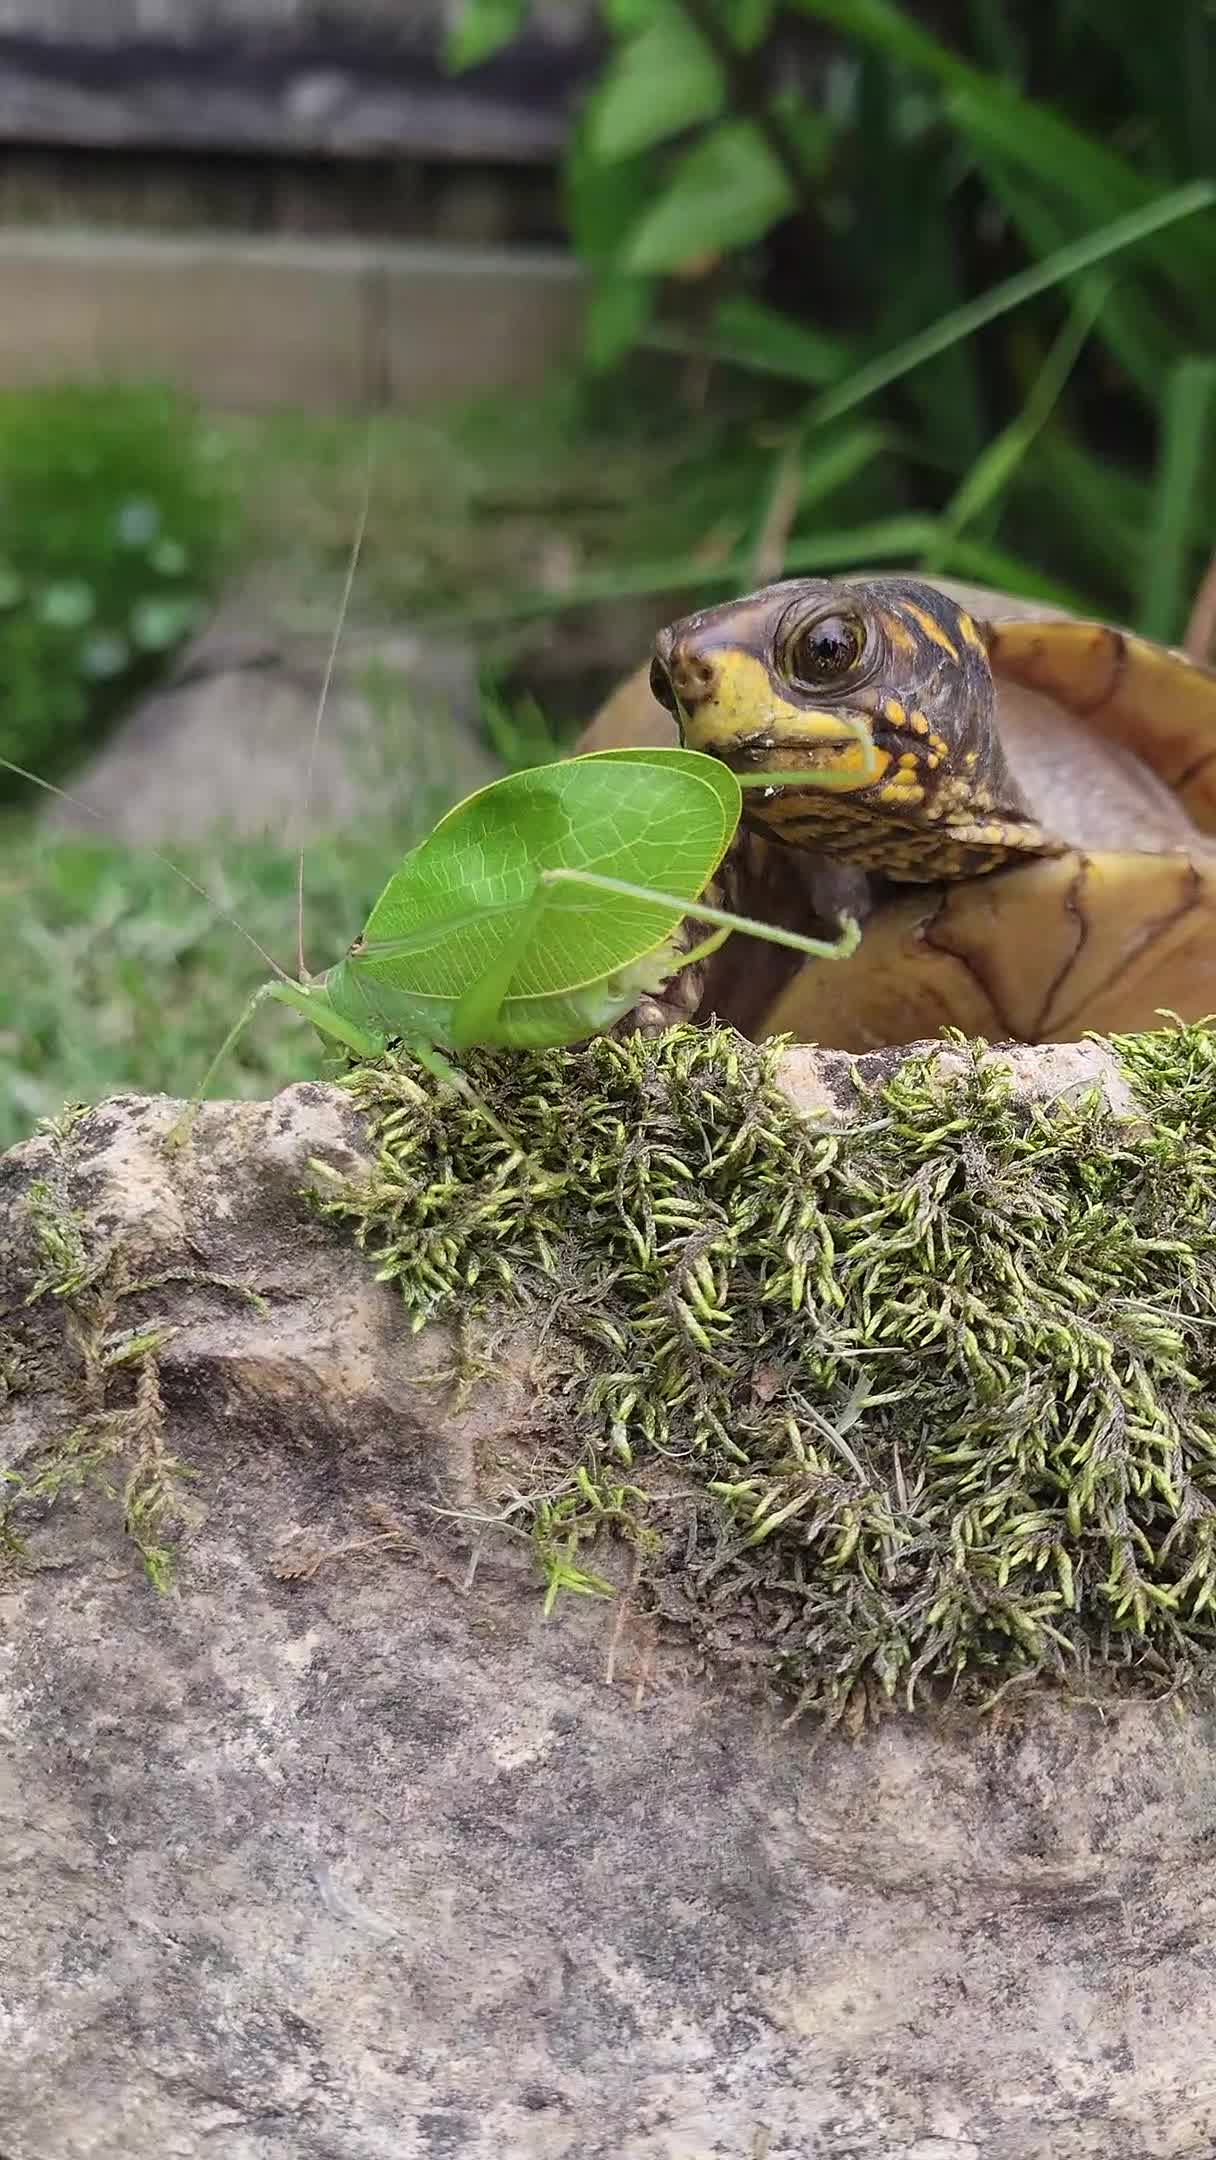 Turtle Slips and Falls Into Pond